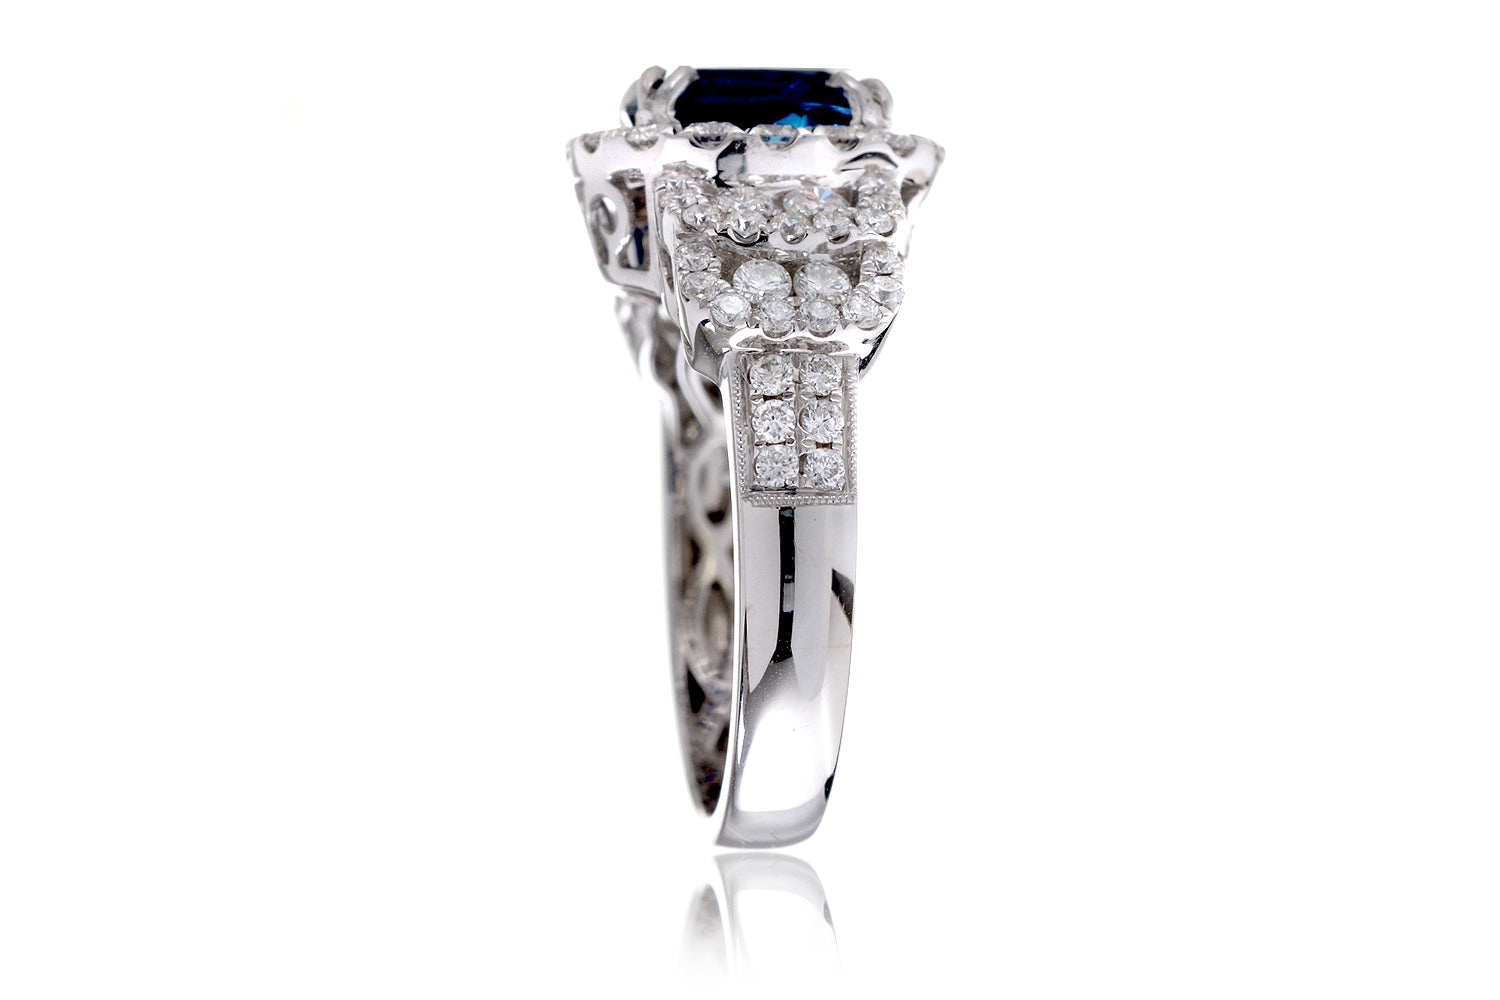 The Thelma Oval Sapphire Ring